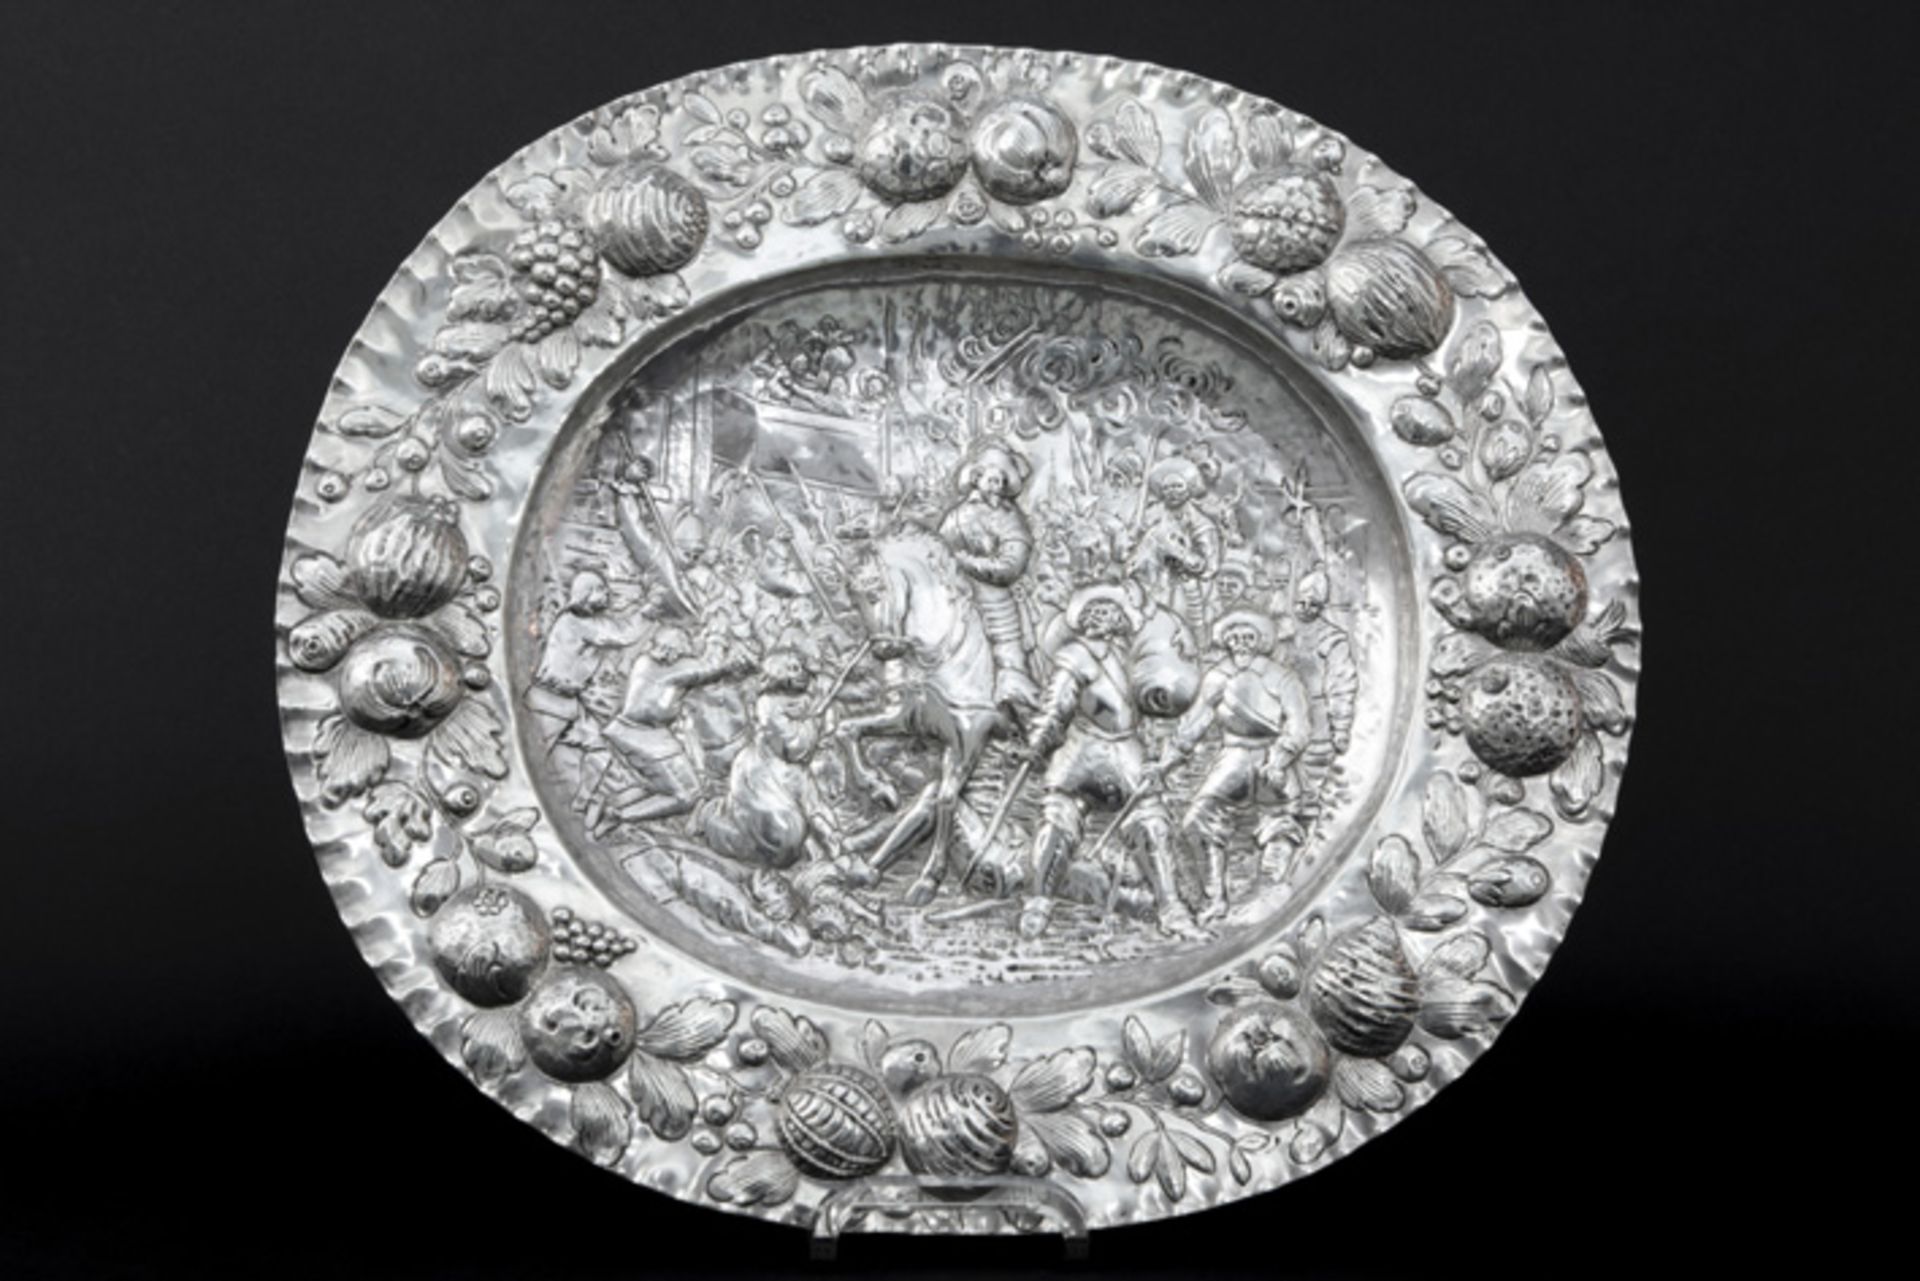 antique baroque style salver in marked silver with a repoussé decor with horsemen and